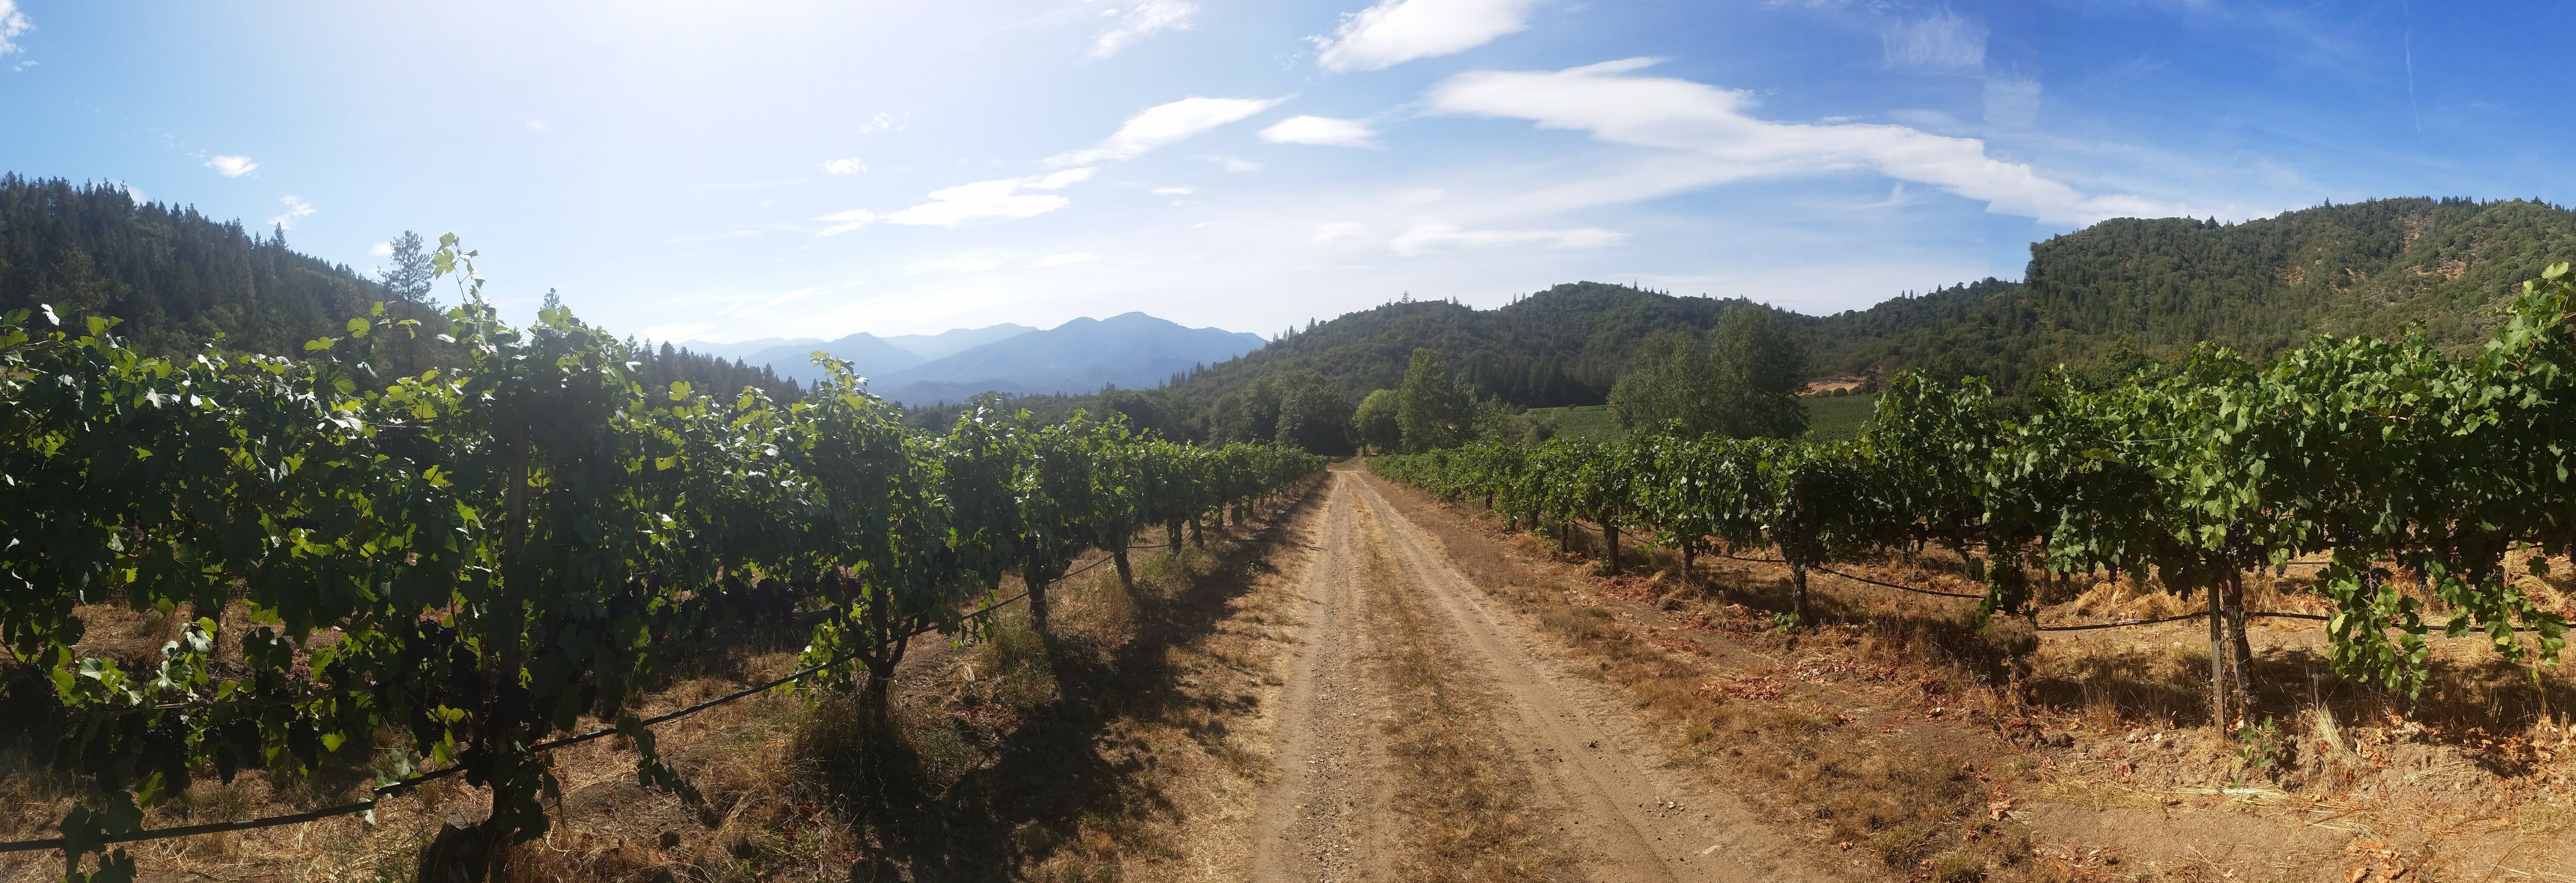 Troon Vineyard: Applegate Valley Wine Trail {Southern Oregon Travel} | The Good Hearted Woman